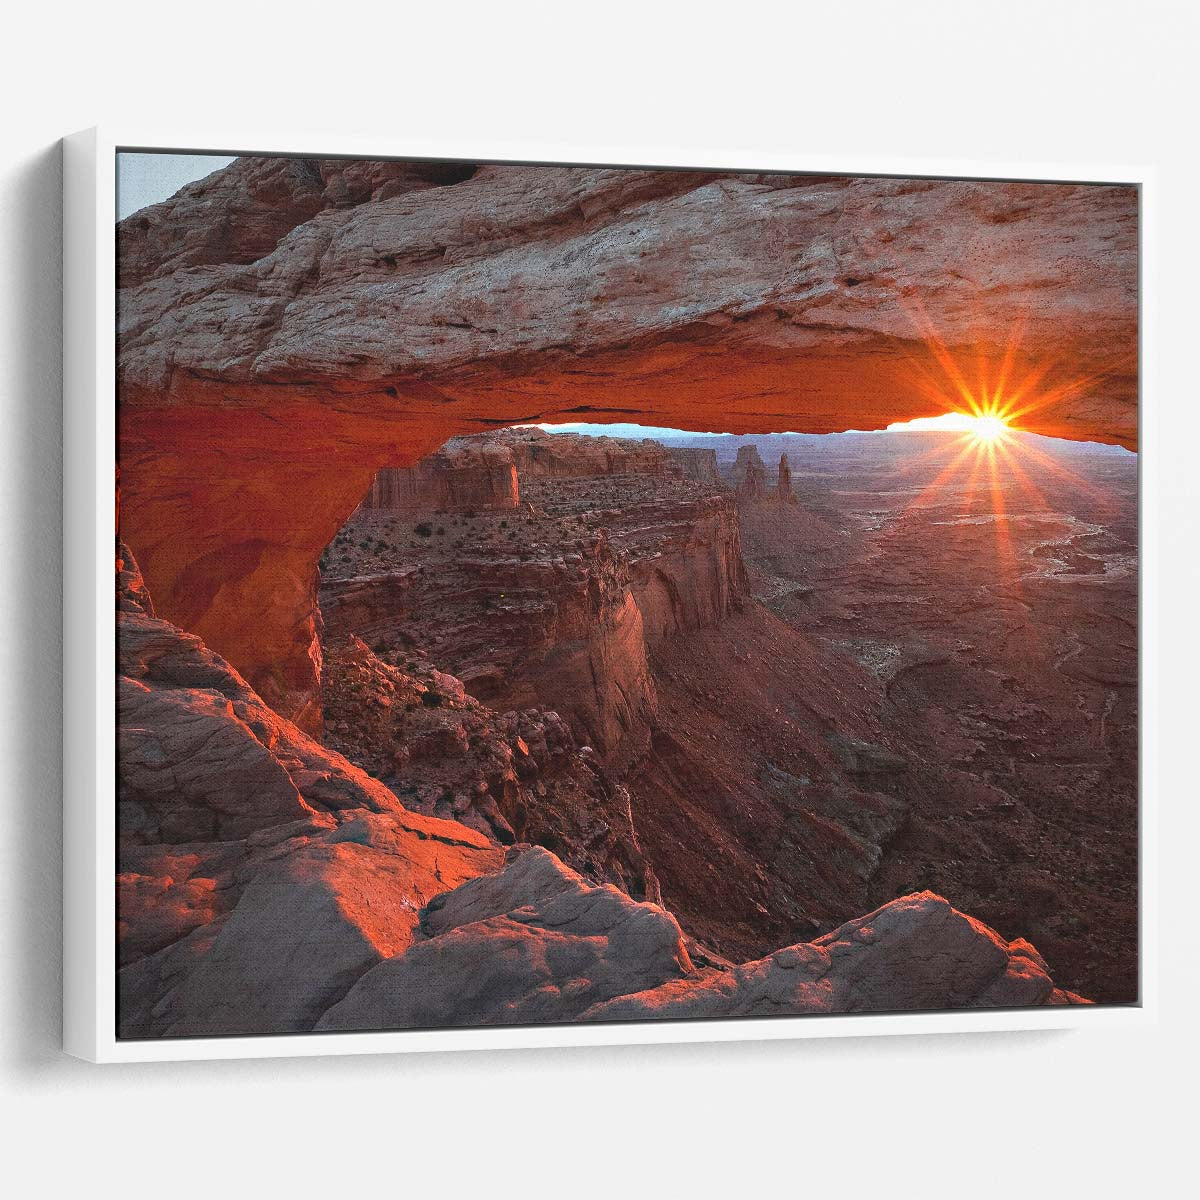 Mesa Arch Sunrise in Canyonlands National Park Wall Art by Luxuriance Designs. Made in USA.